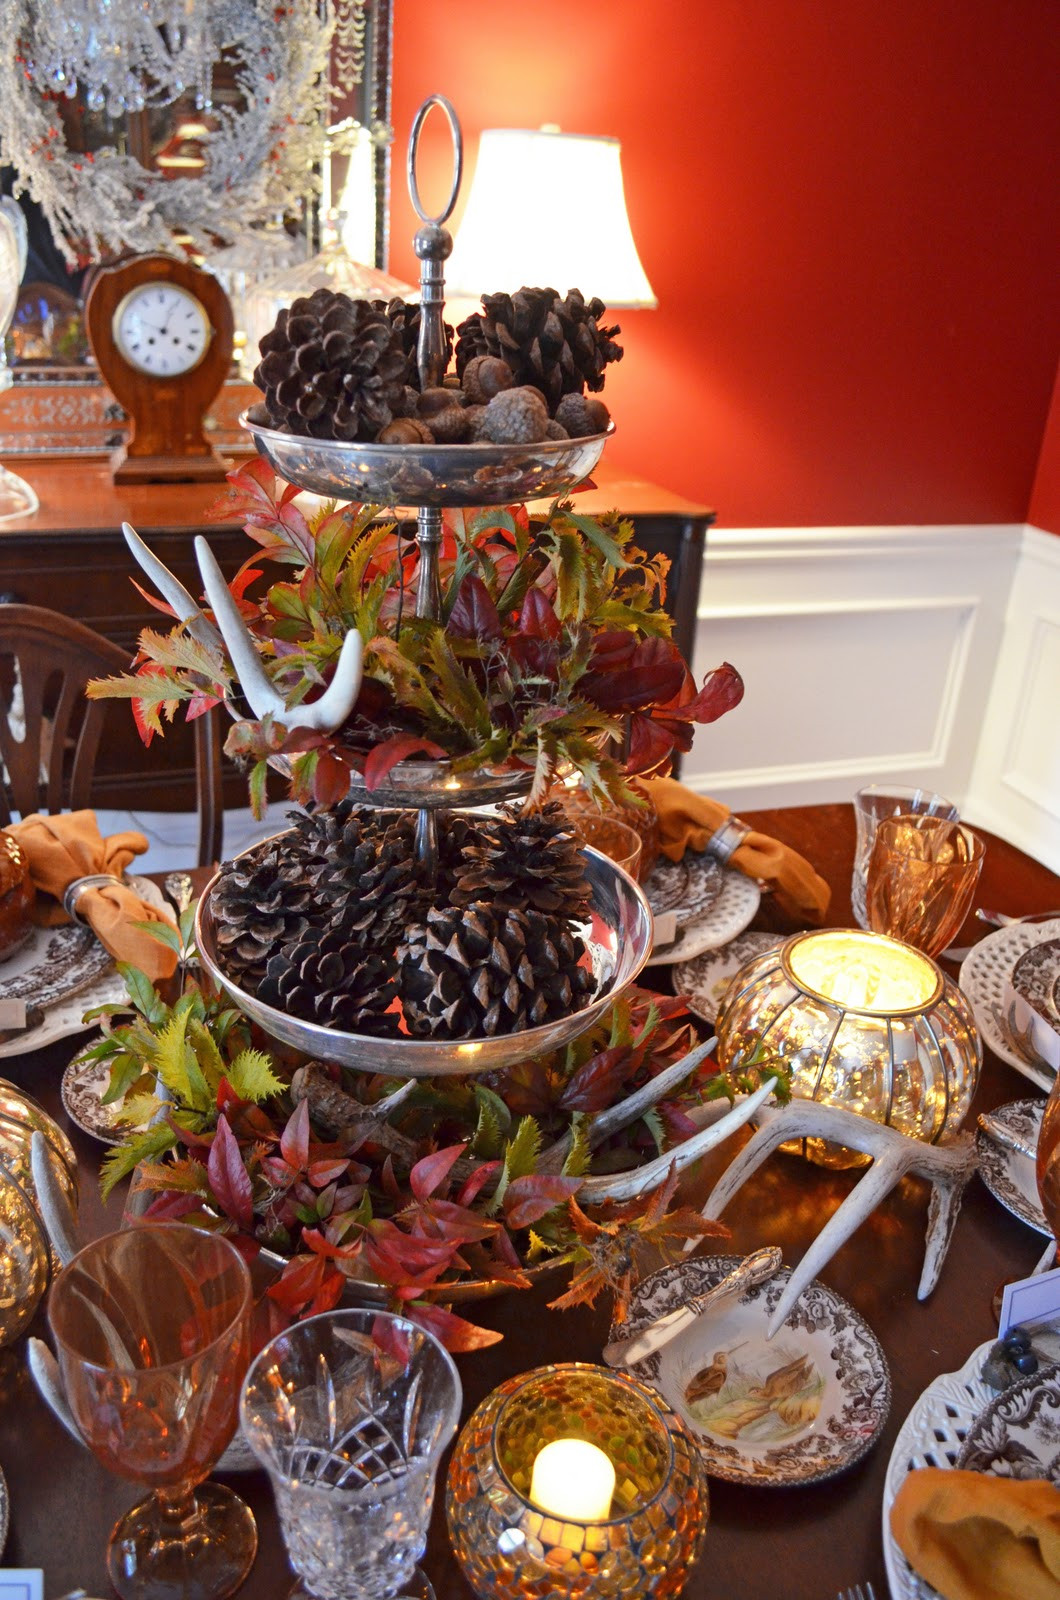 Thanksgiving Table Decorations Ideas
 Thanksgiving Table Setting with Nature Themed Centepiece